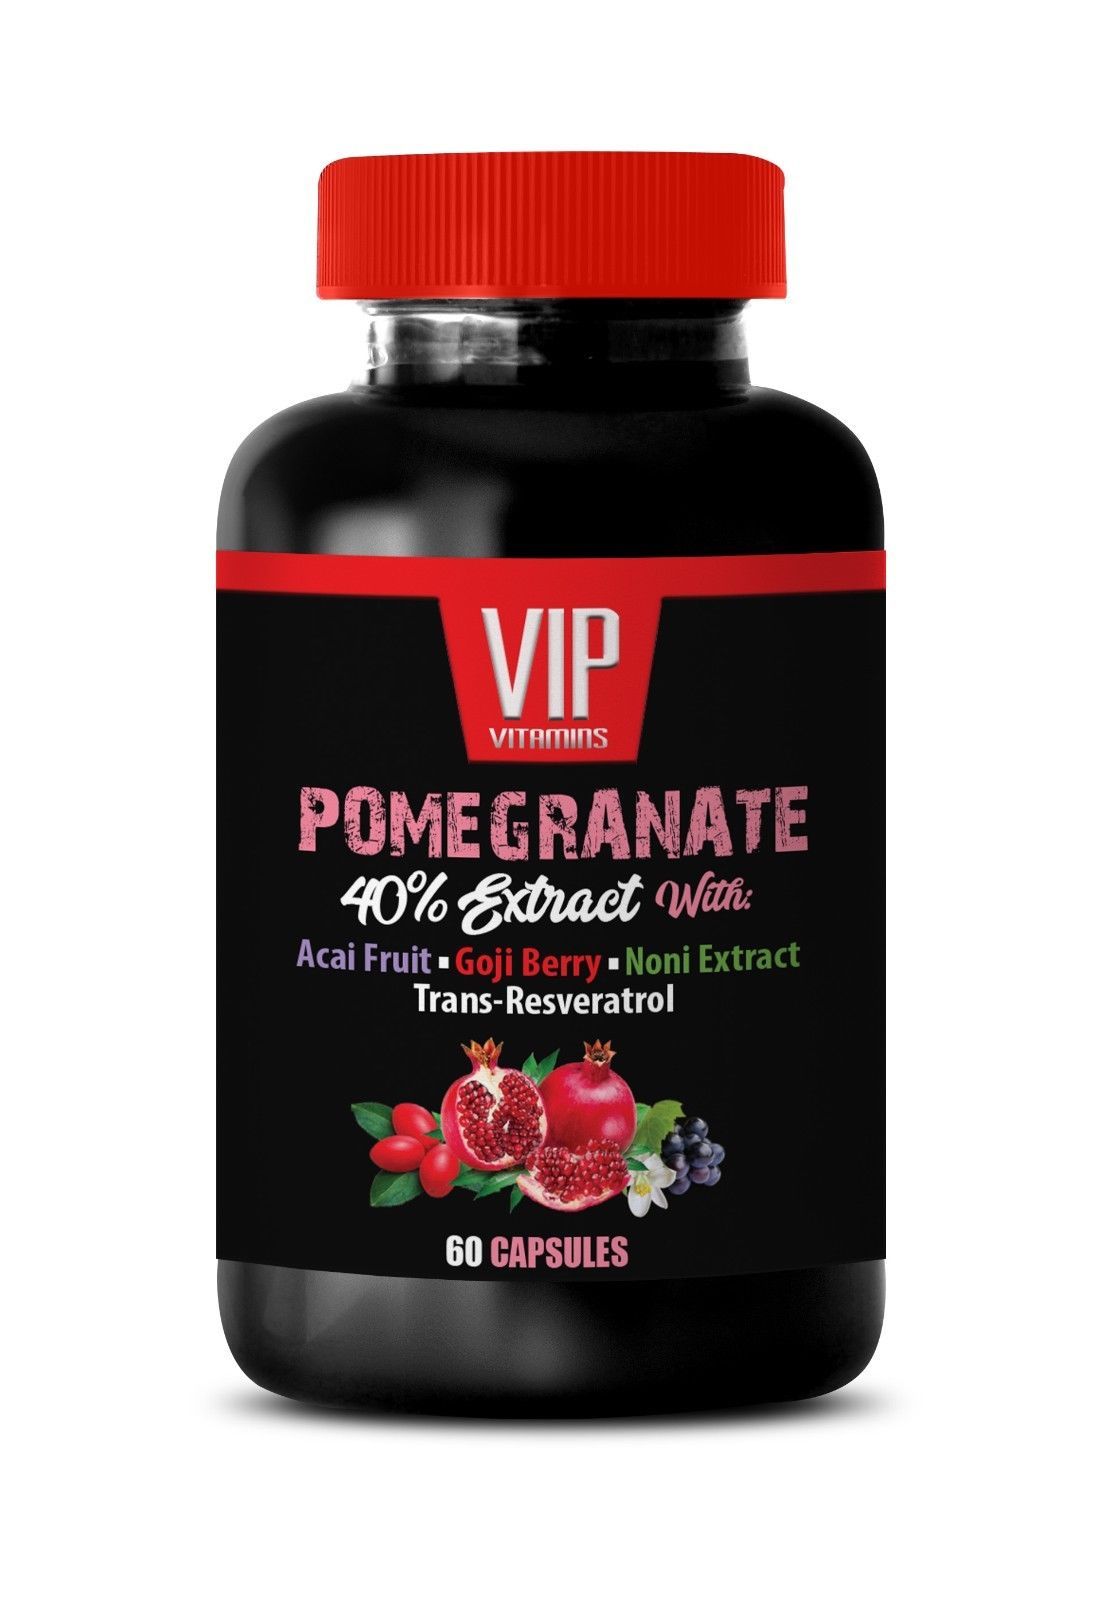 Primary image for pomegranate extract capsules - POMEGRANATE 40% EXTRACT - anti inflammatory - 1B